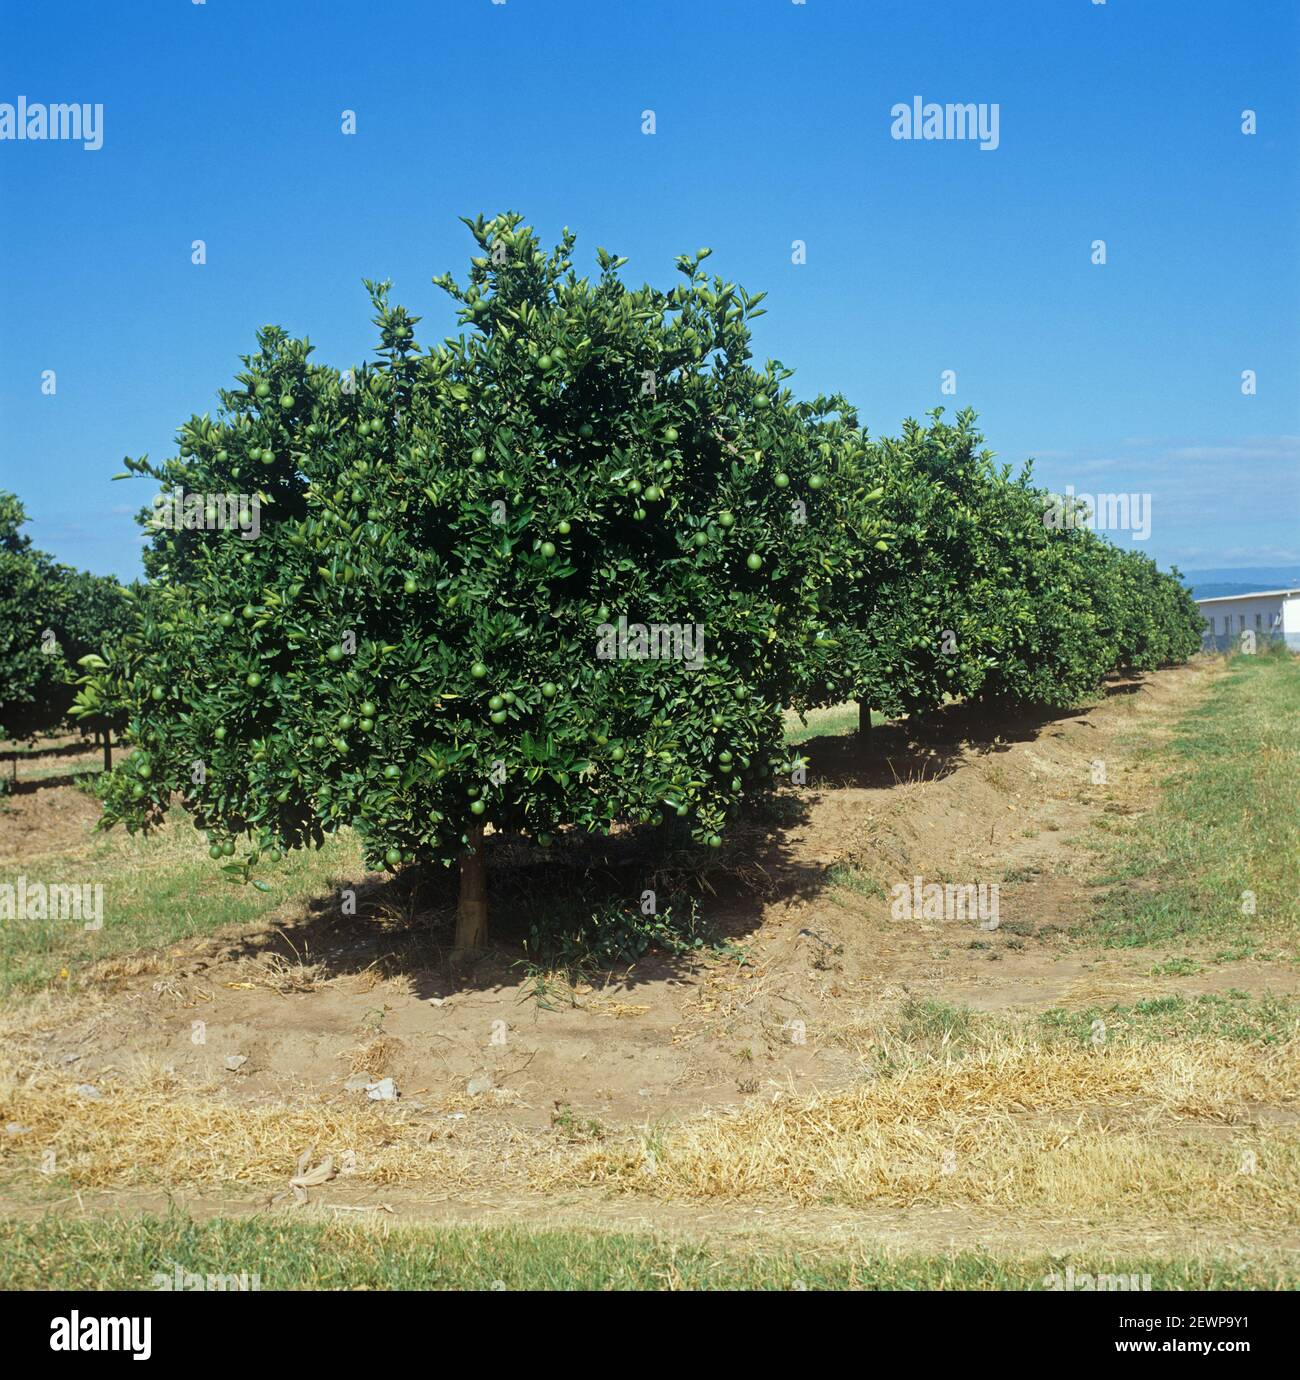 Rows of orange trees (Citrus sinensis) with green, maturing fruit in an orchard in the Low Veldt, Transvaal, South Africa, February Stock Photo